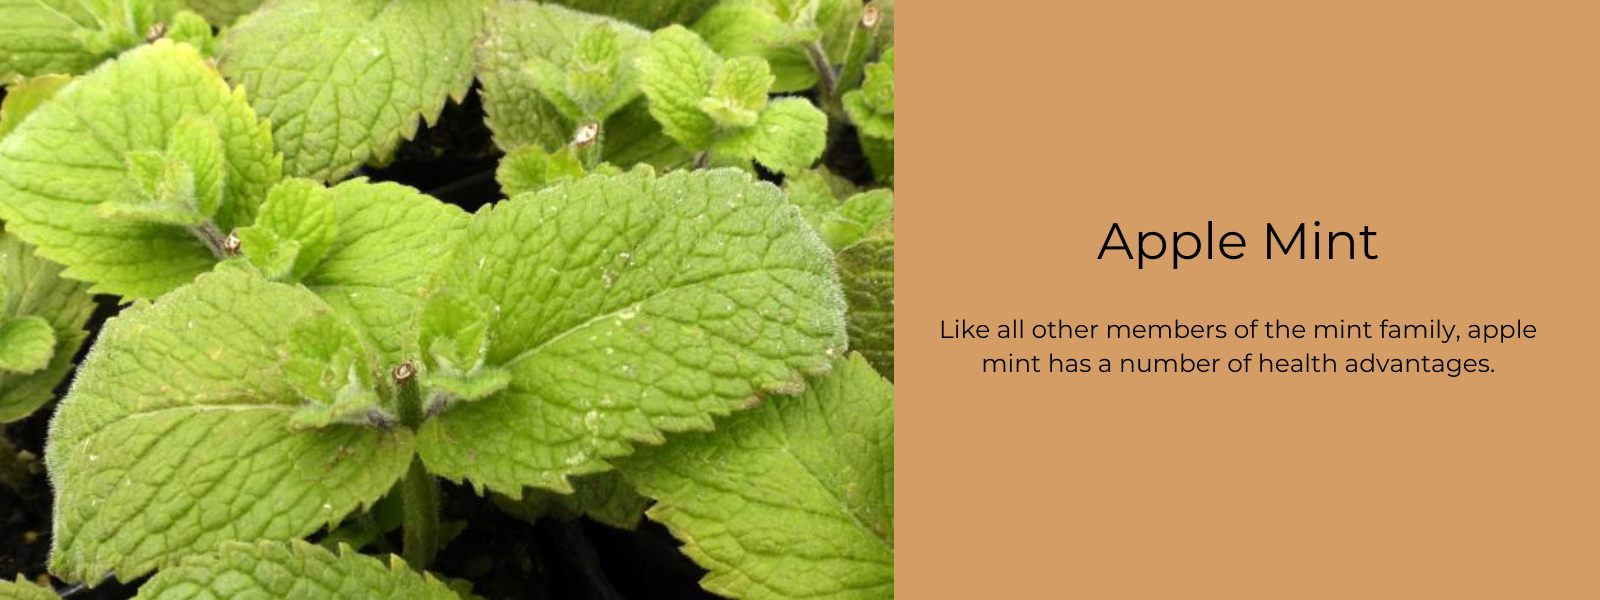 Apple mint - Health Benefits, Uses and Important Facts